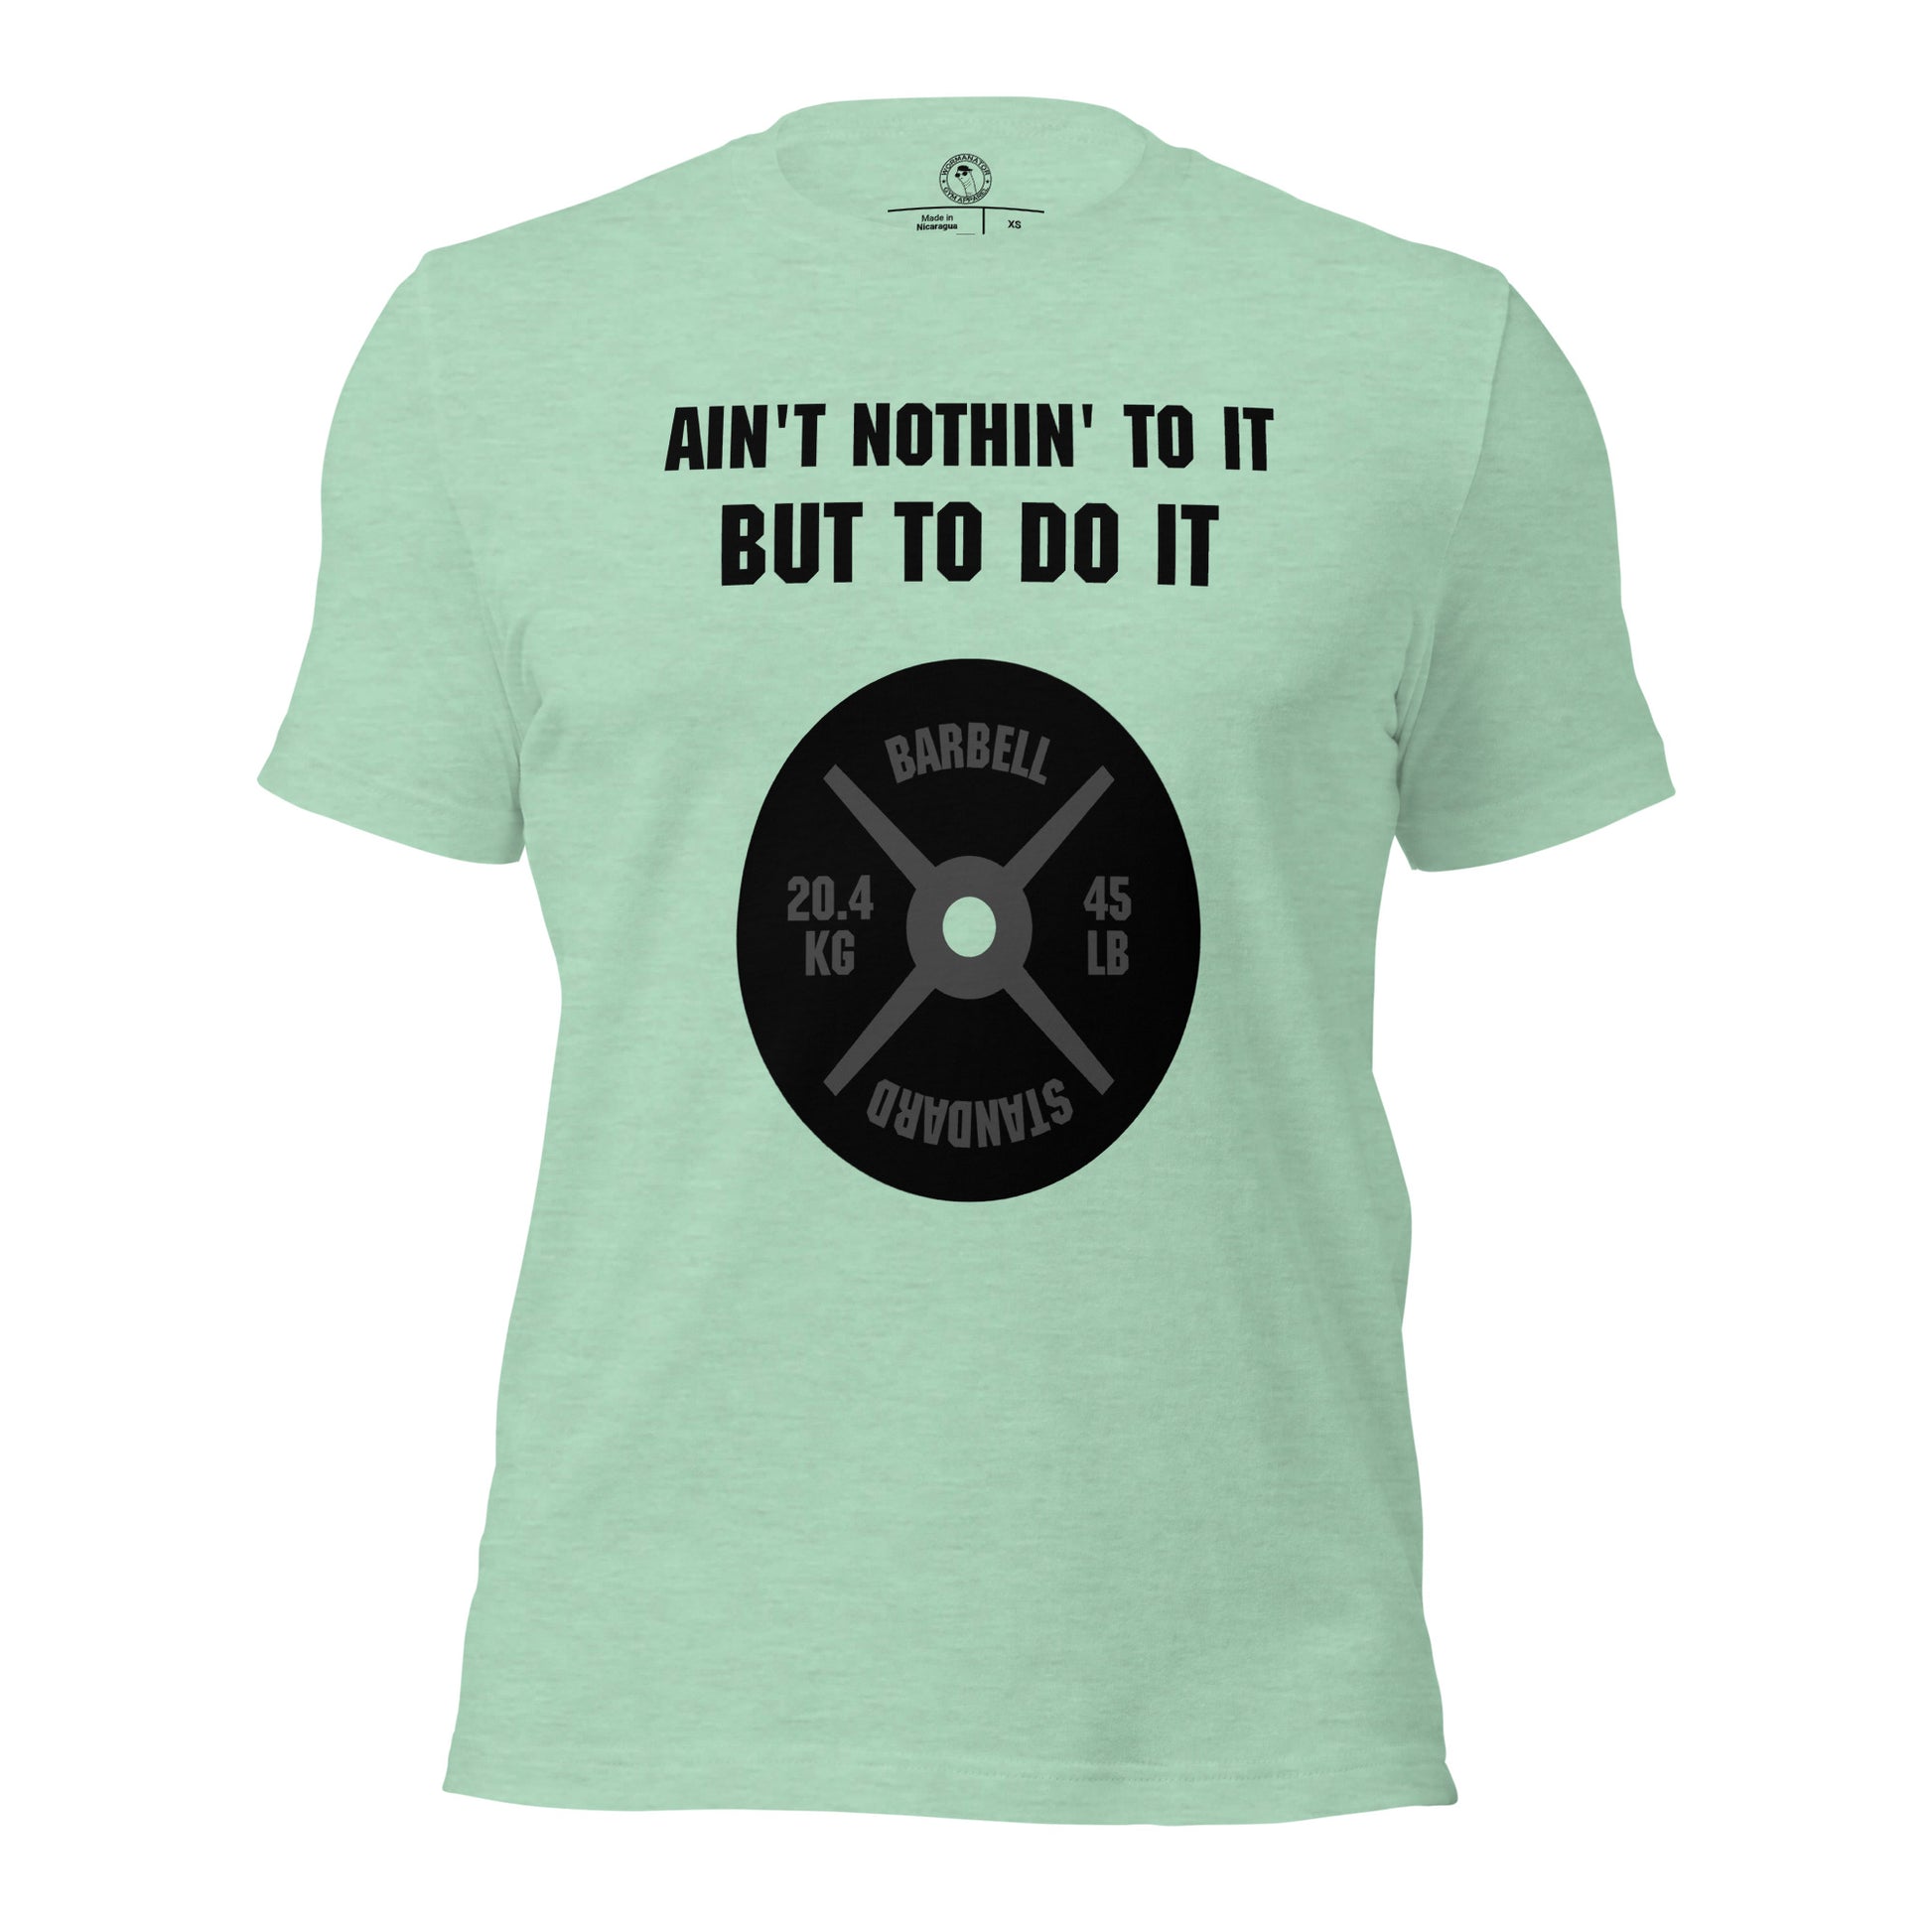 Ain't Nothin' To It But To Do It Shirt in Heather Prism Mint